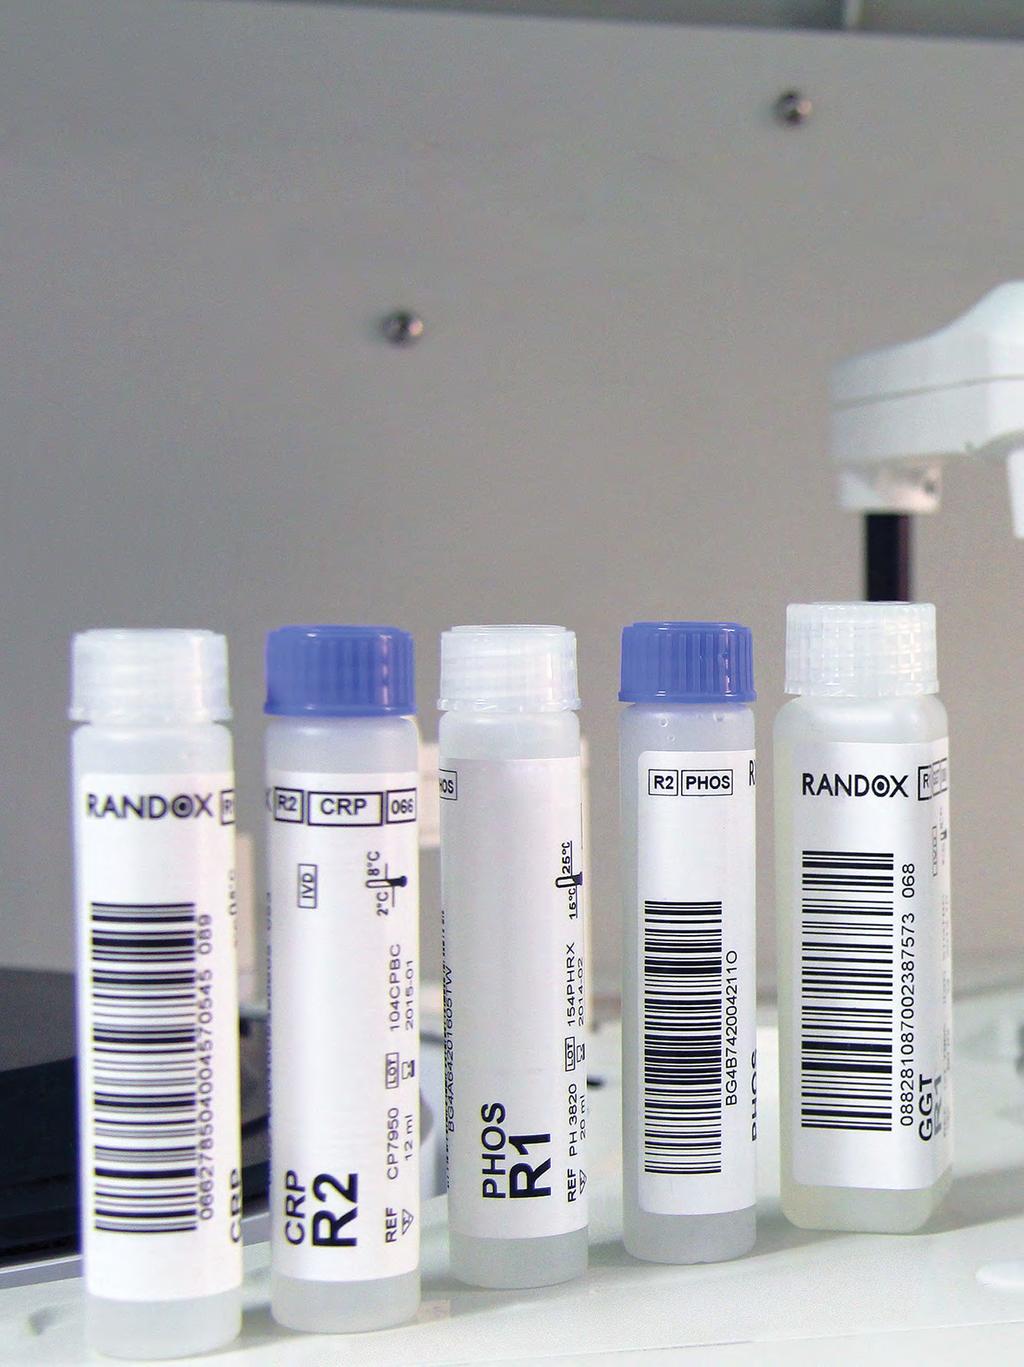 In addition to offering an unrivalled range of chemistries, Randox reagents offer users further beneficial features including: Randox easy-read reagents - reagents packaged in dedicated bottles and